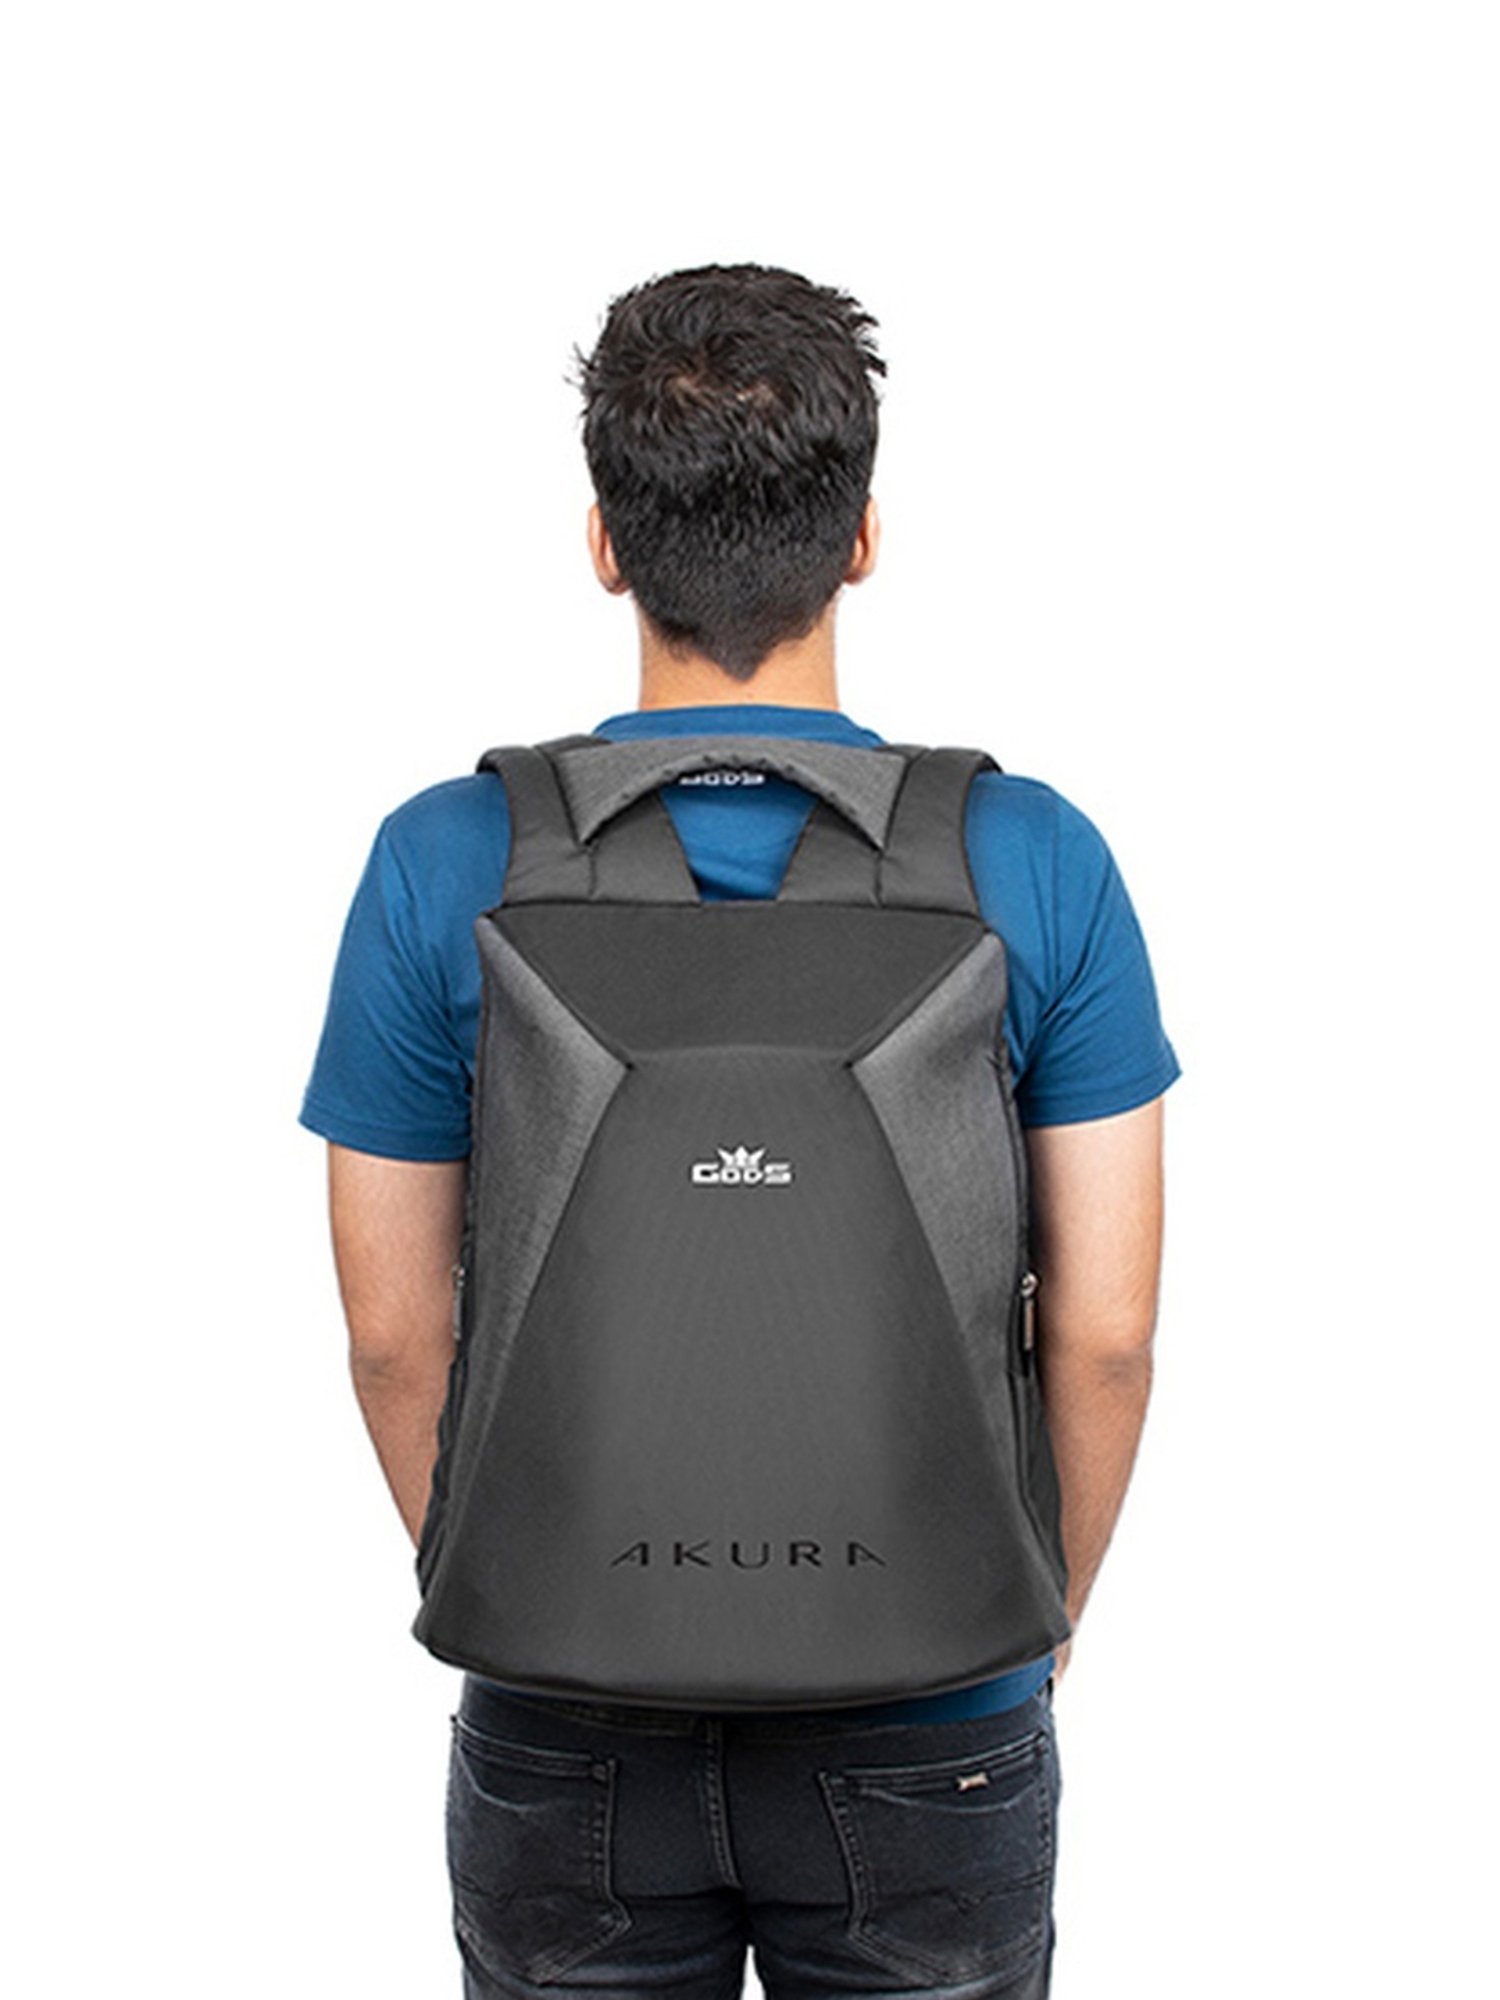 Ghost Face Laptop Backpack – Leo's Treasure Box